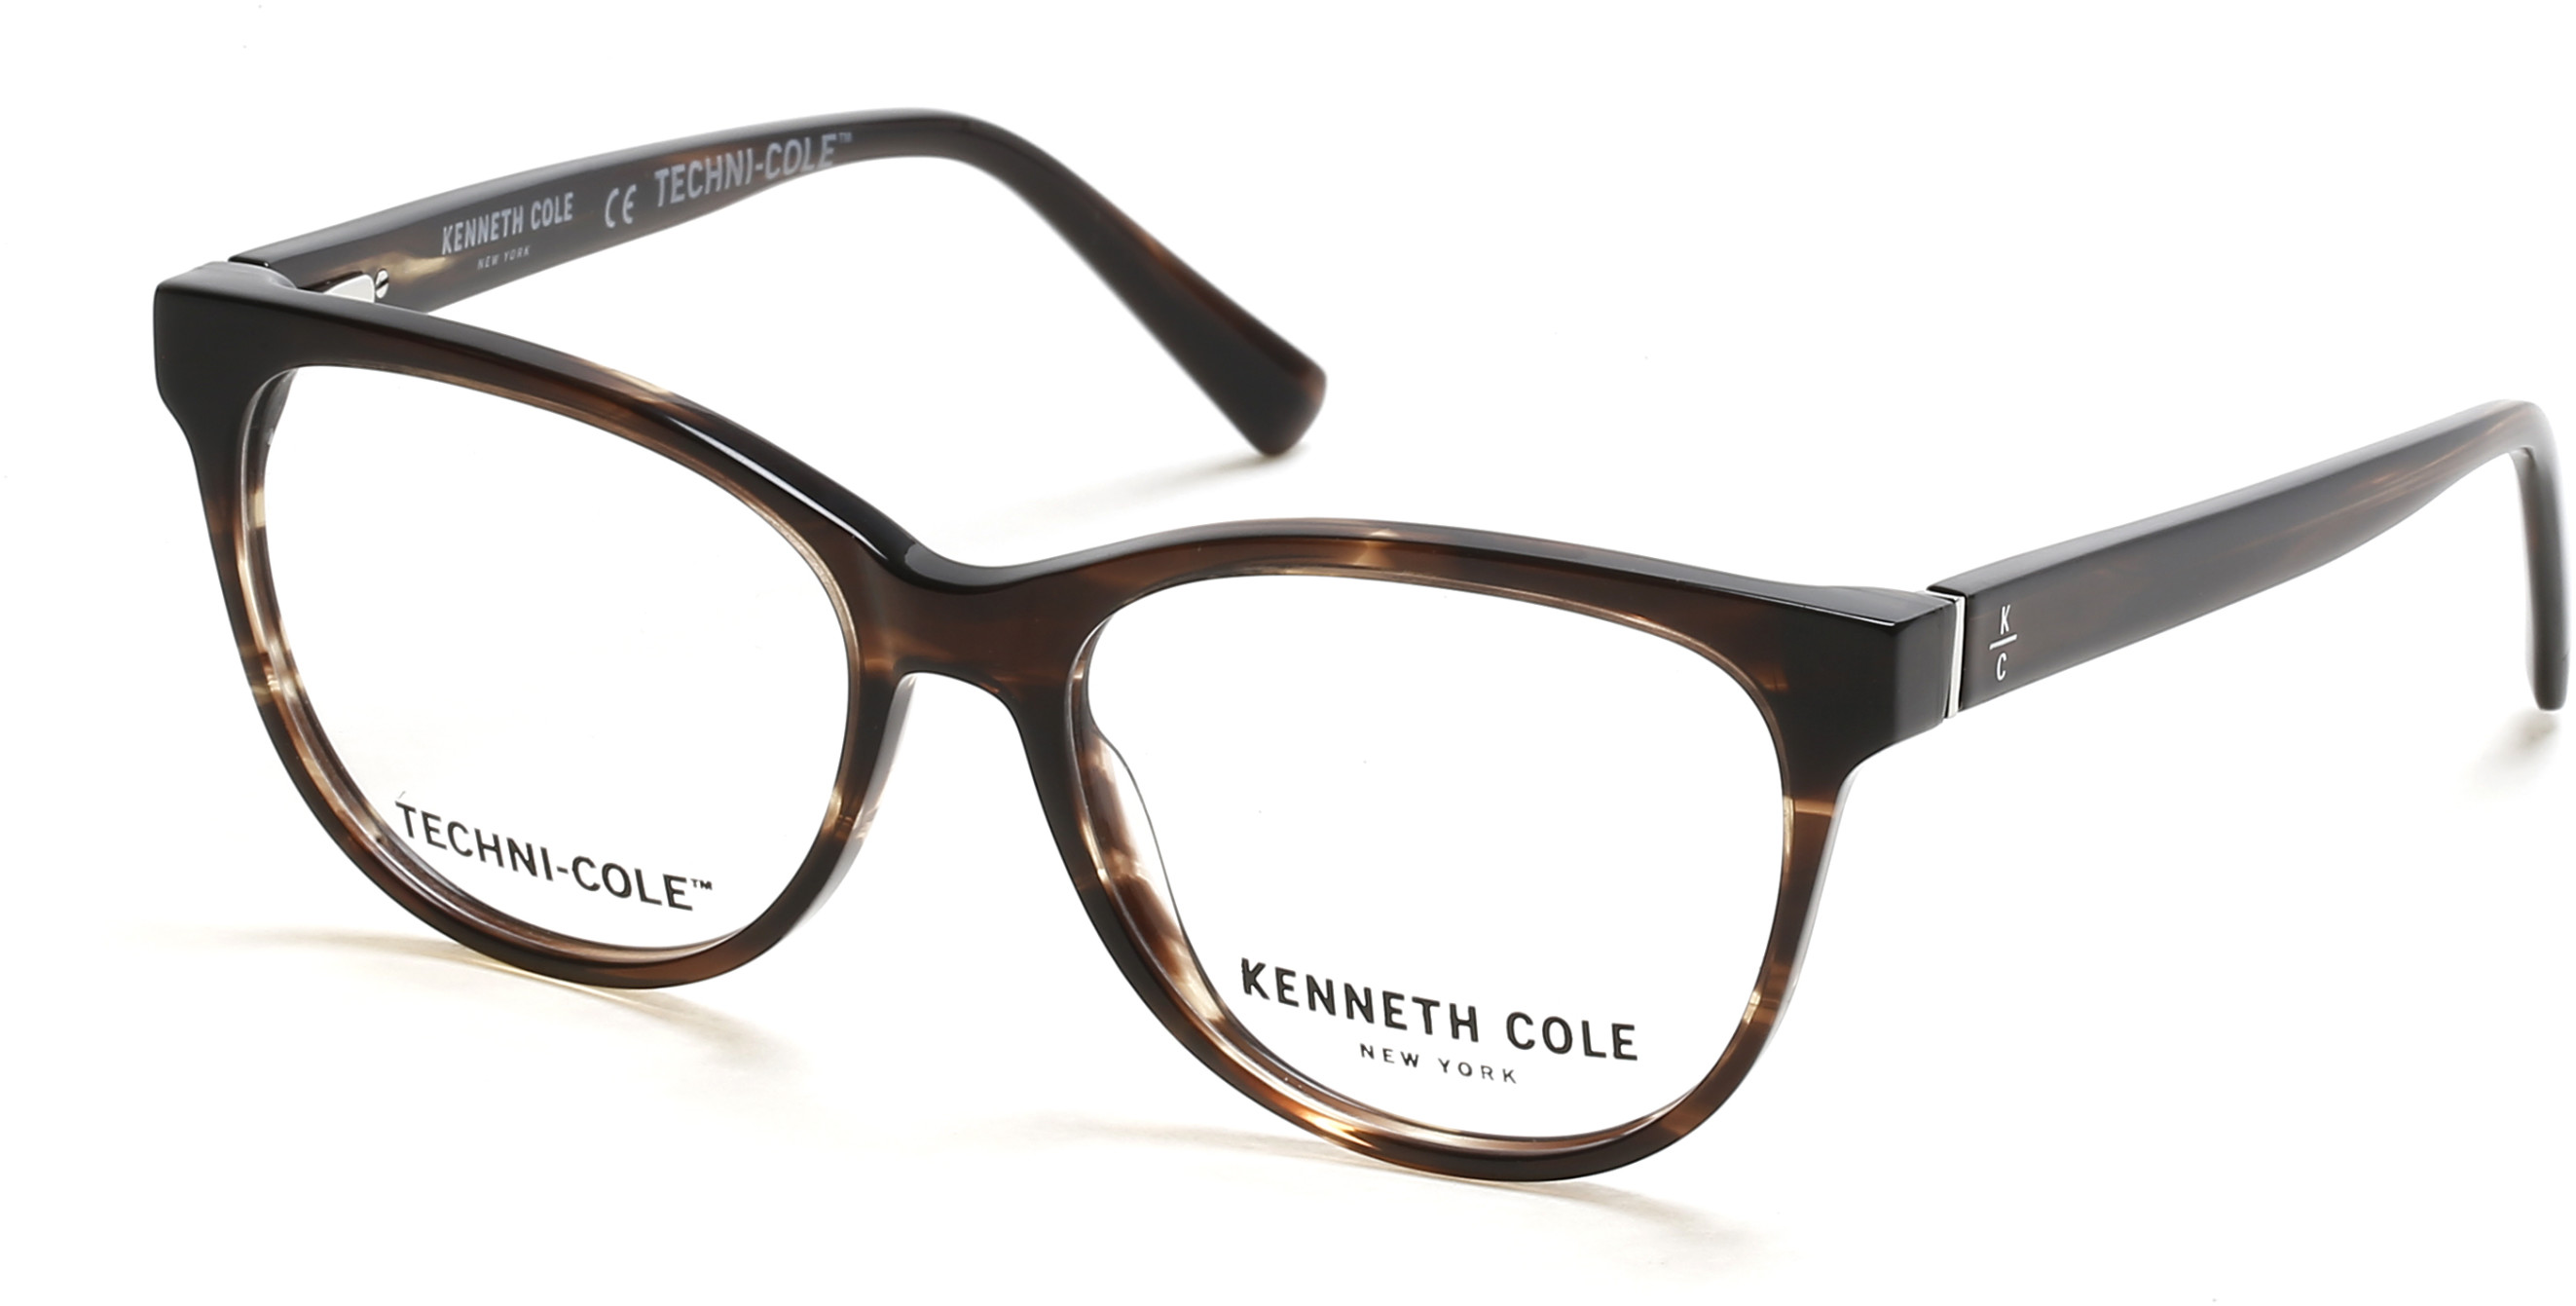 KENNETH COLE NY 0334 045